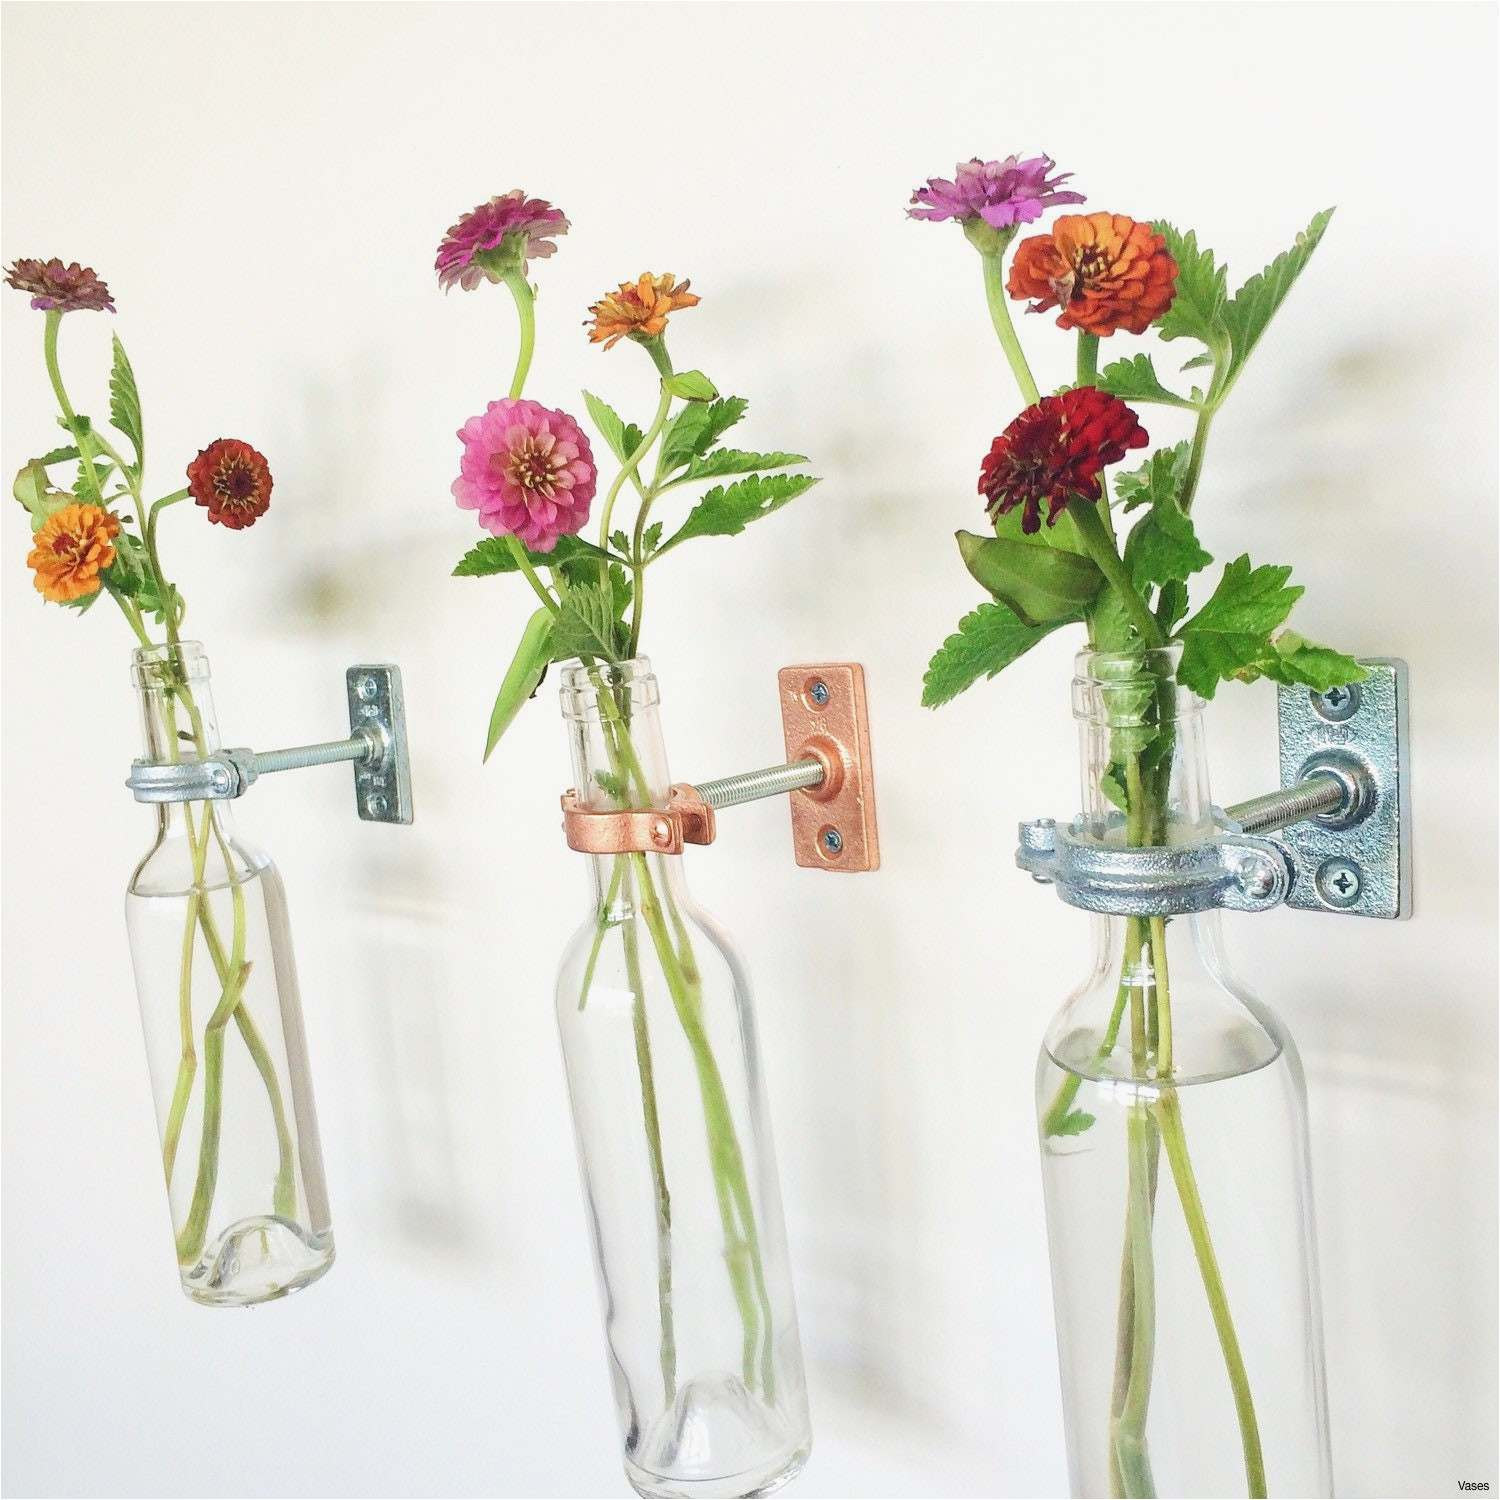 27 Lovable Cheap Glass Vases Near Me 2024 free download cheap glass vases near me of wedding flower centerpieces style 30 awesome vintage glass vases for inside wedding flower centerpieces photos floral decor for home beautiful decor floral decor